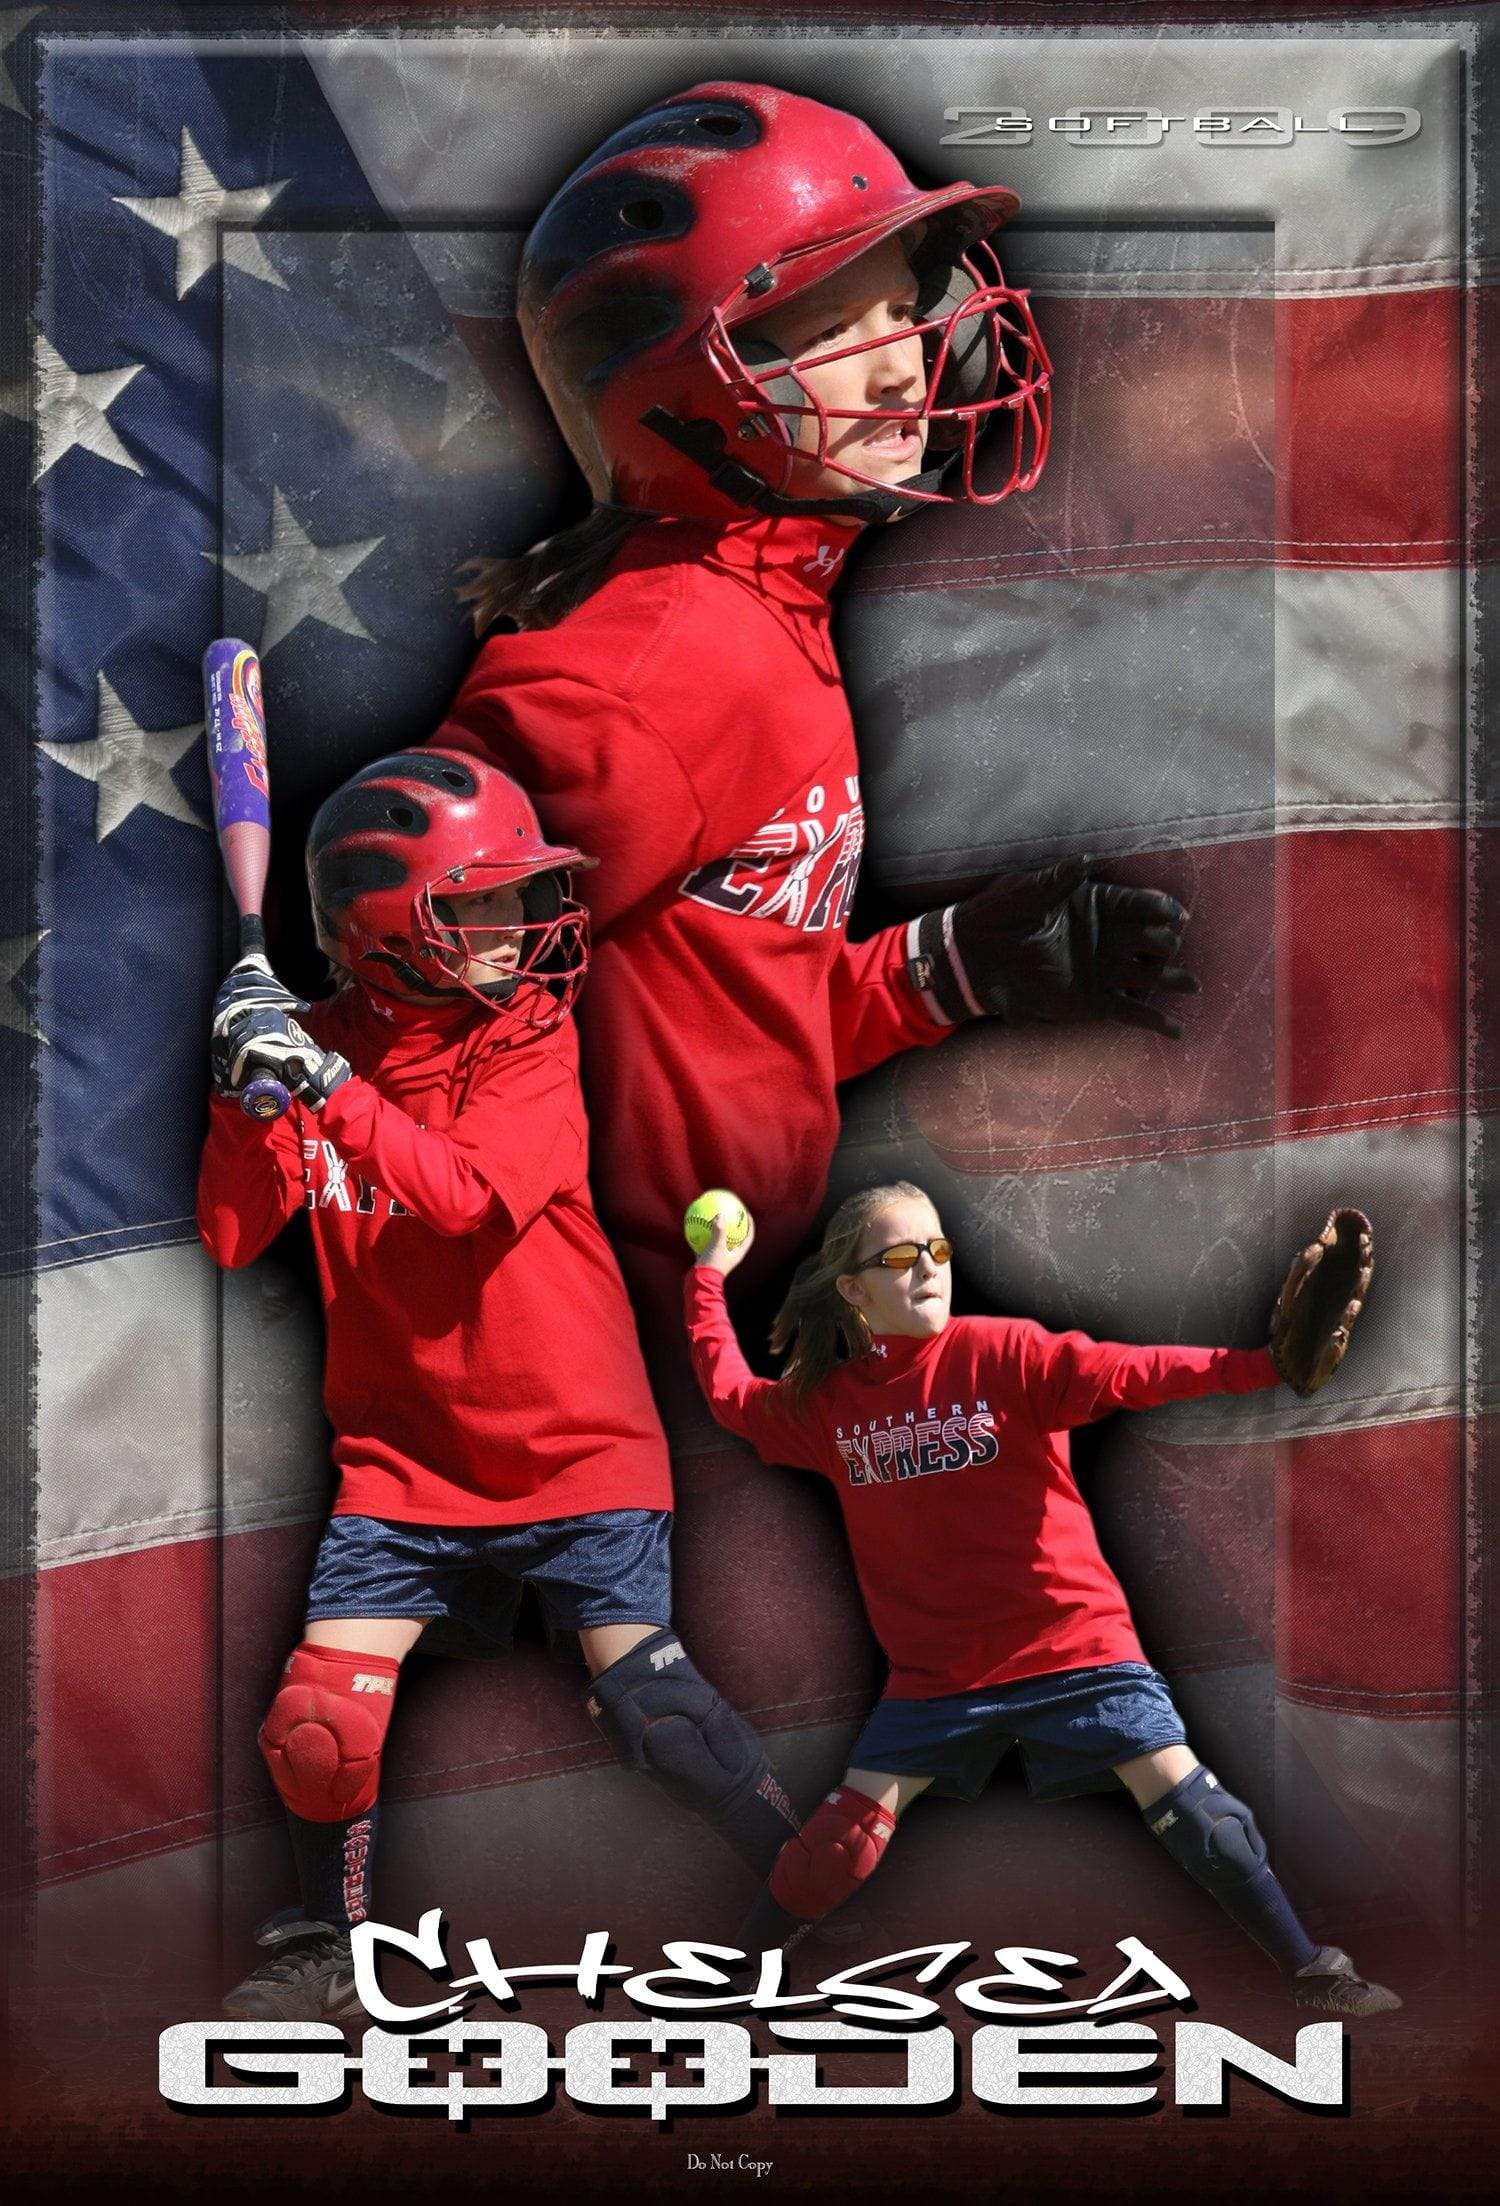 USA v.2 - Action Extraction Poster/Banner-Photoshop Template - Photo Solutions